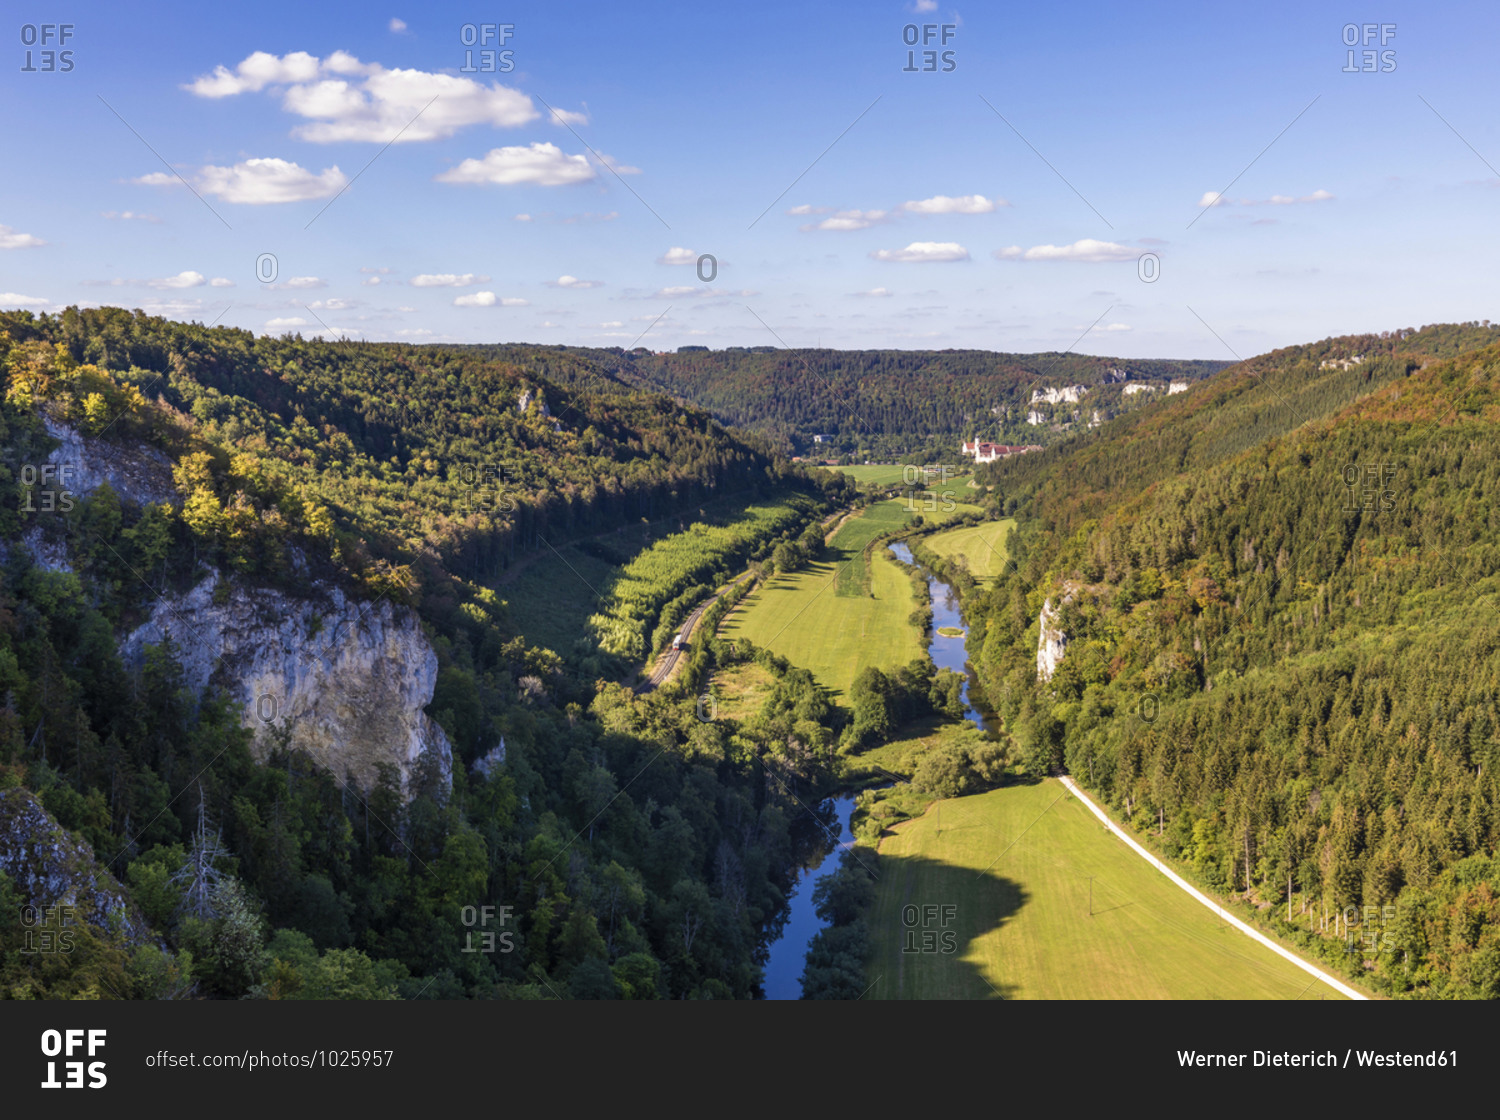 Germany- Baden-Wurttemberg- Beuron- Scenic view of Danube Valley seen from Knopfmacherfelsen